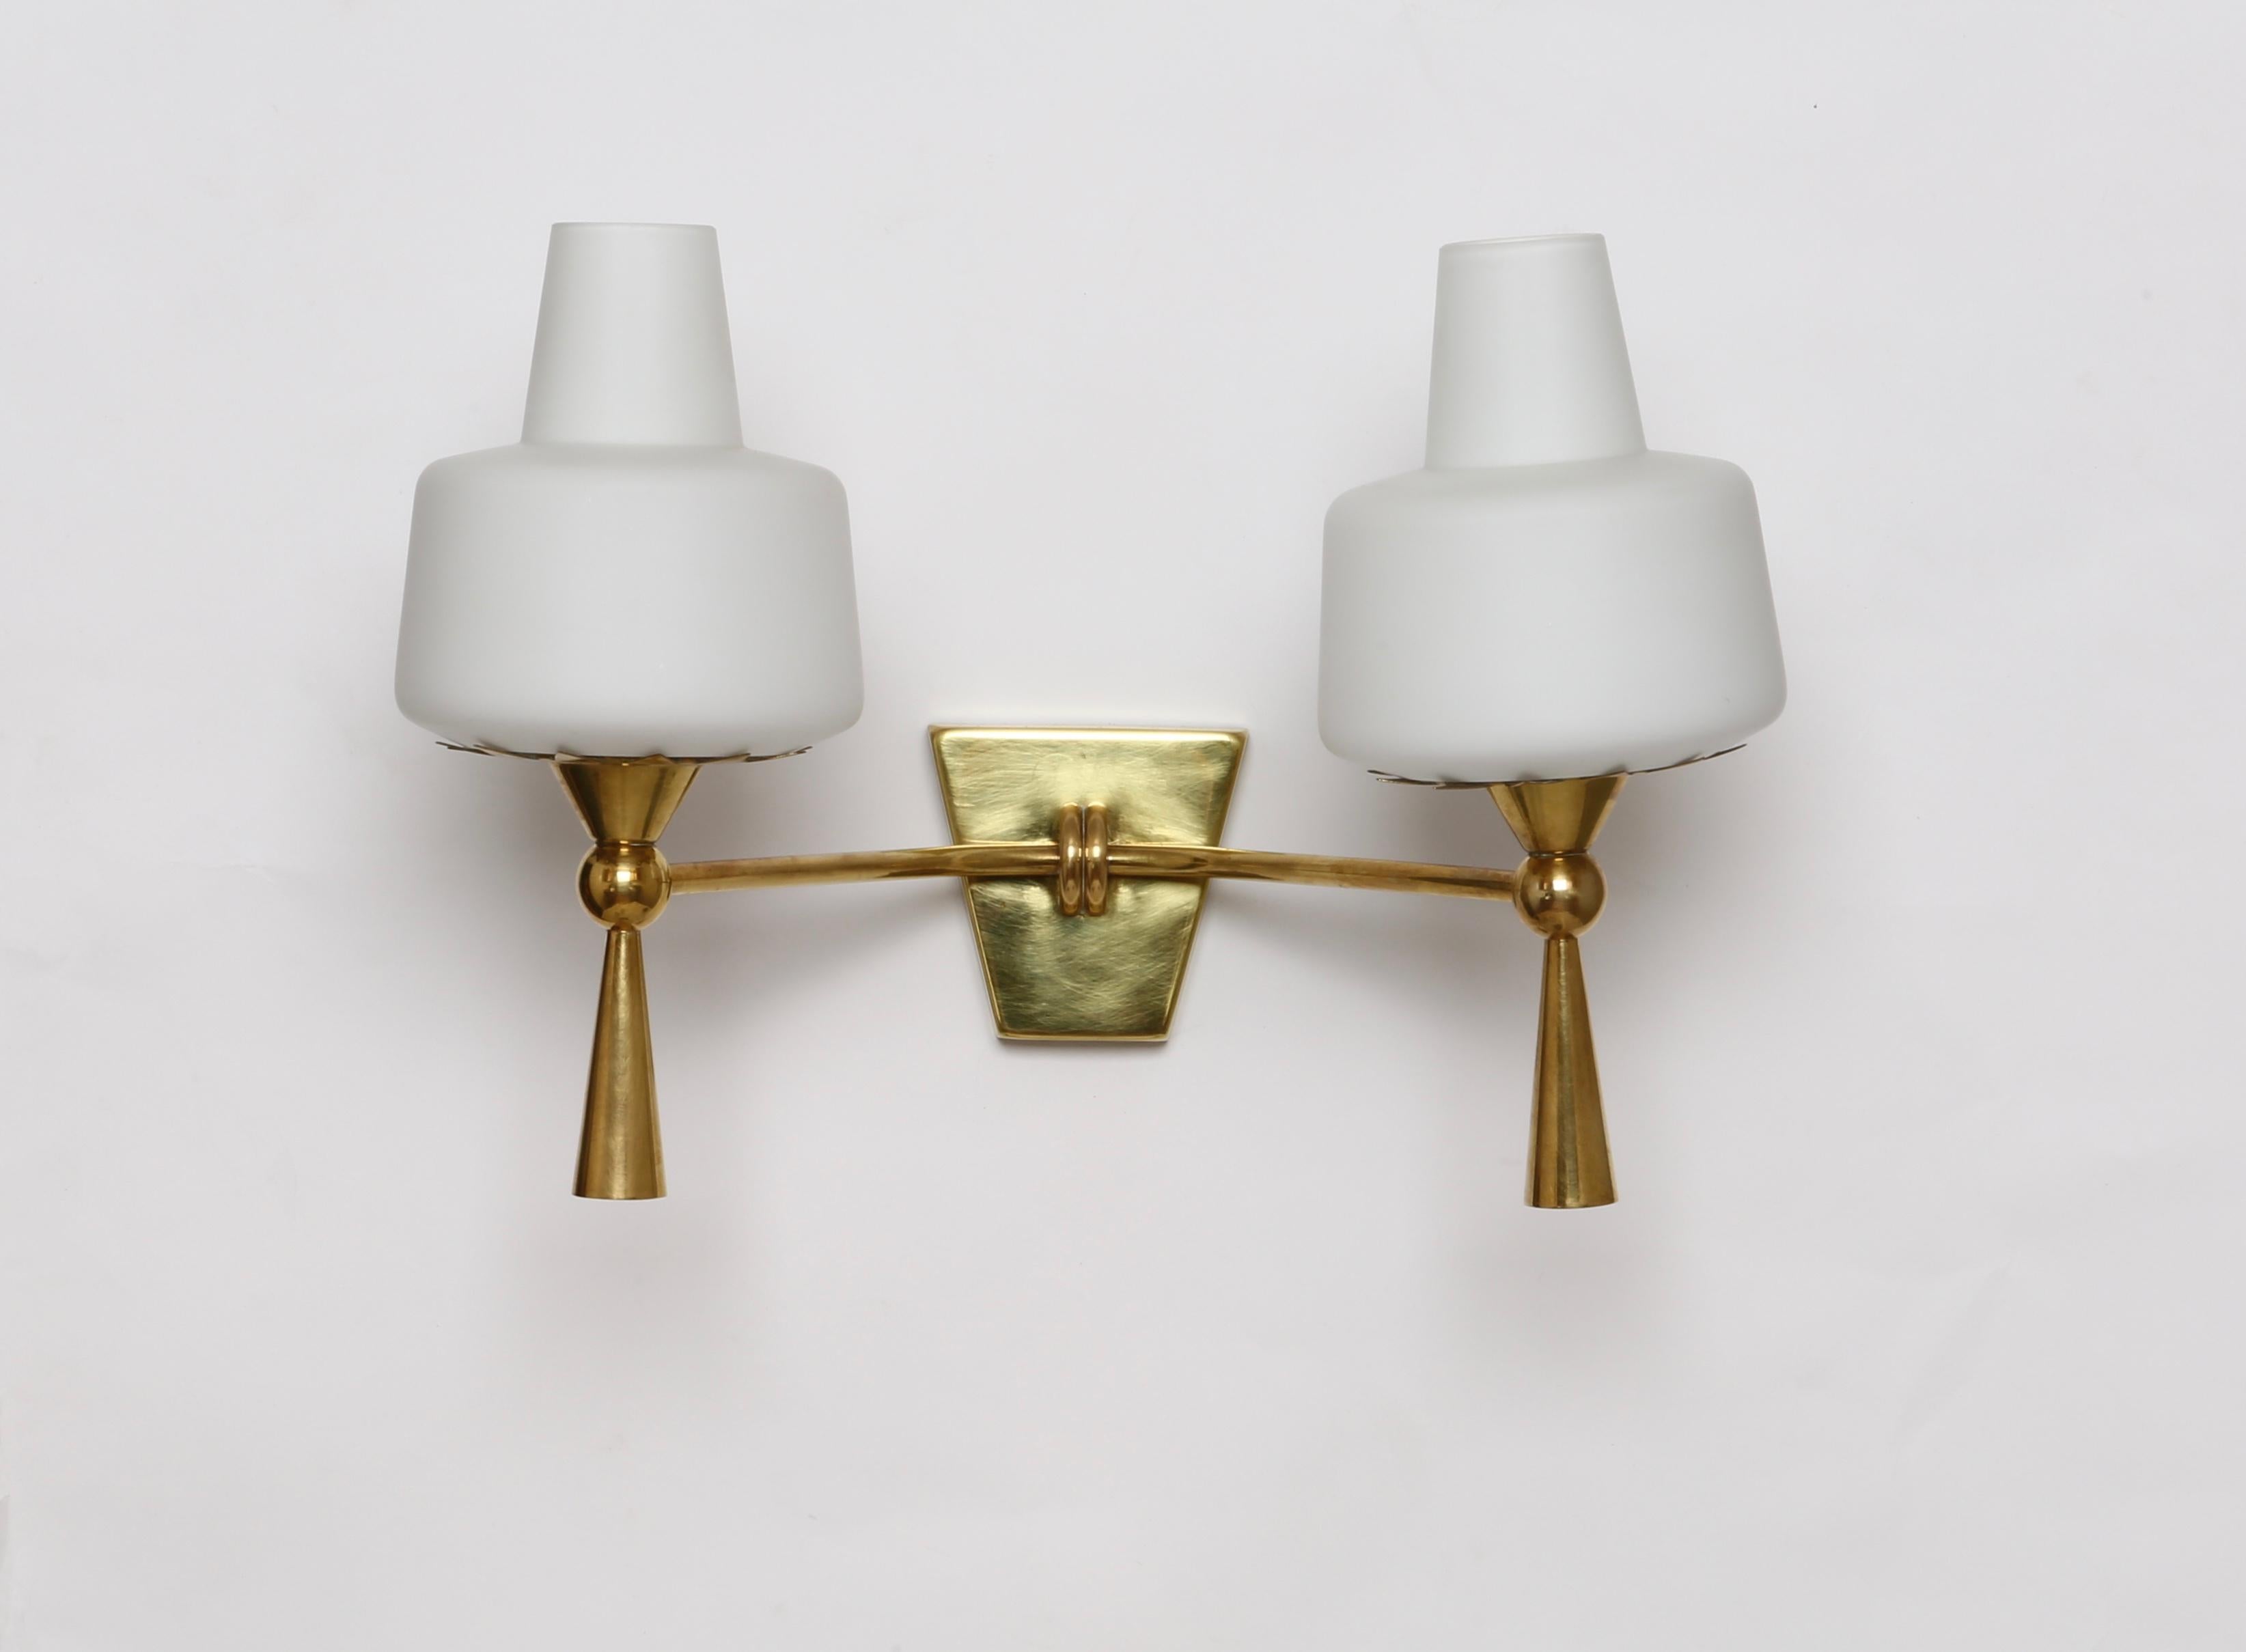 Pair of Stilnovo style wall lamps.
Brass, glass.